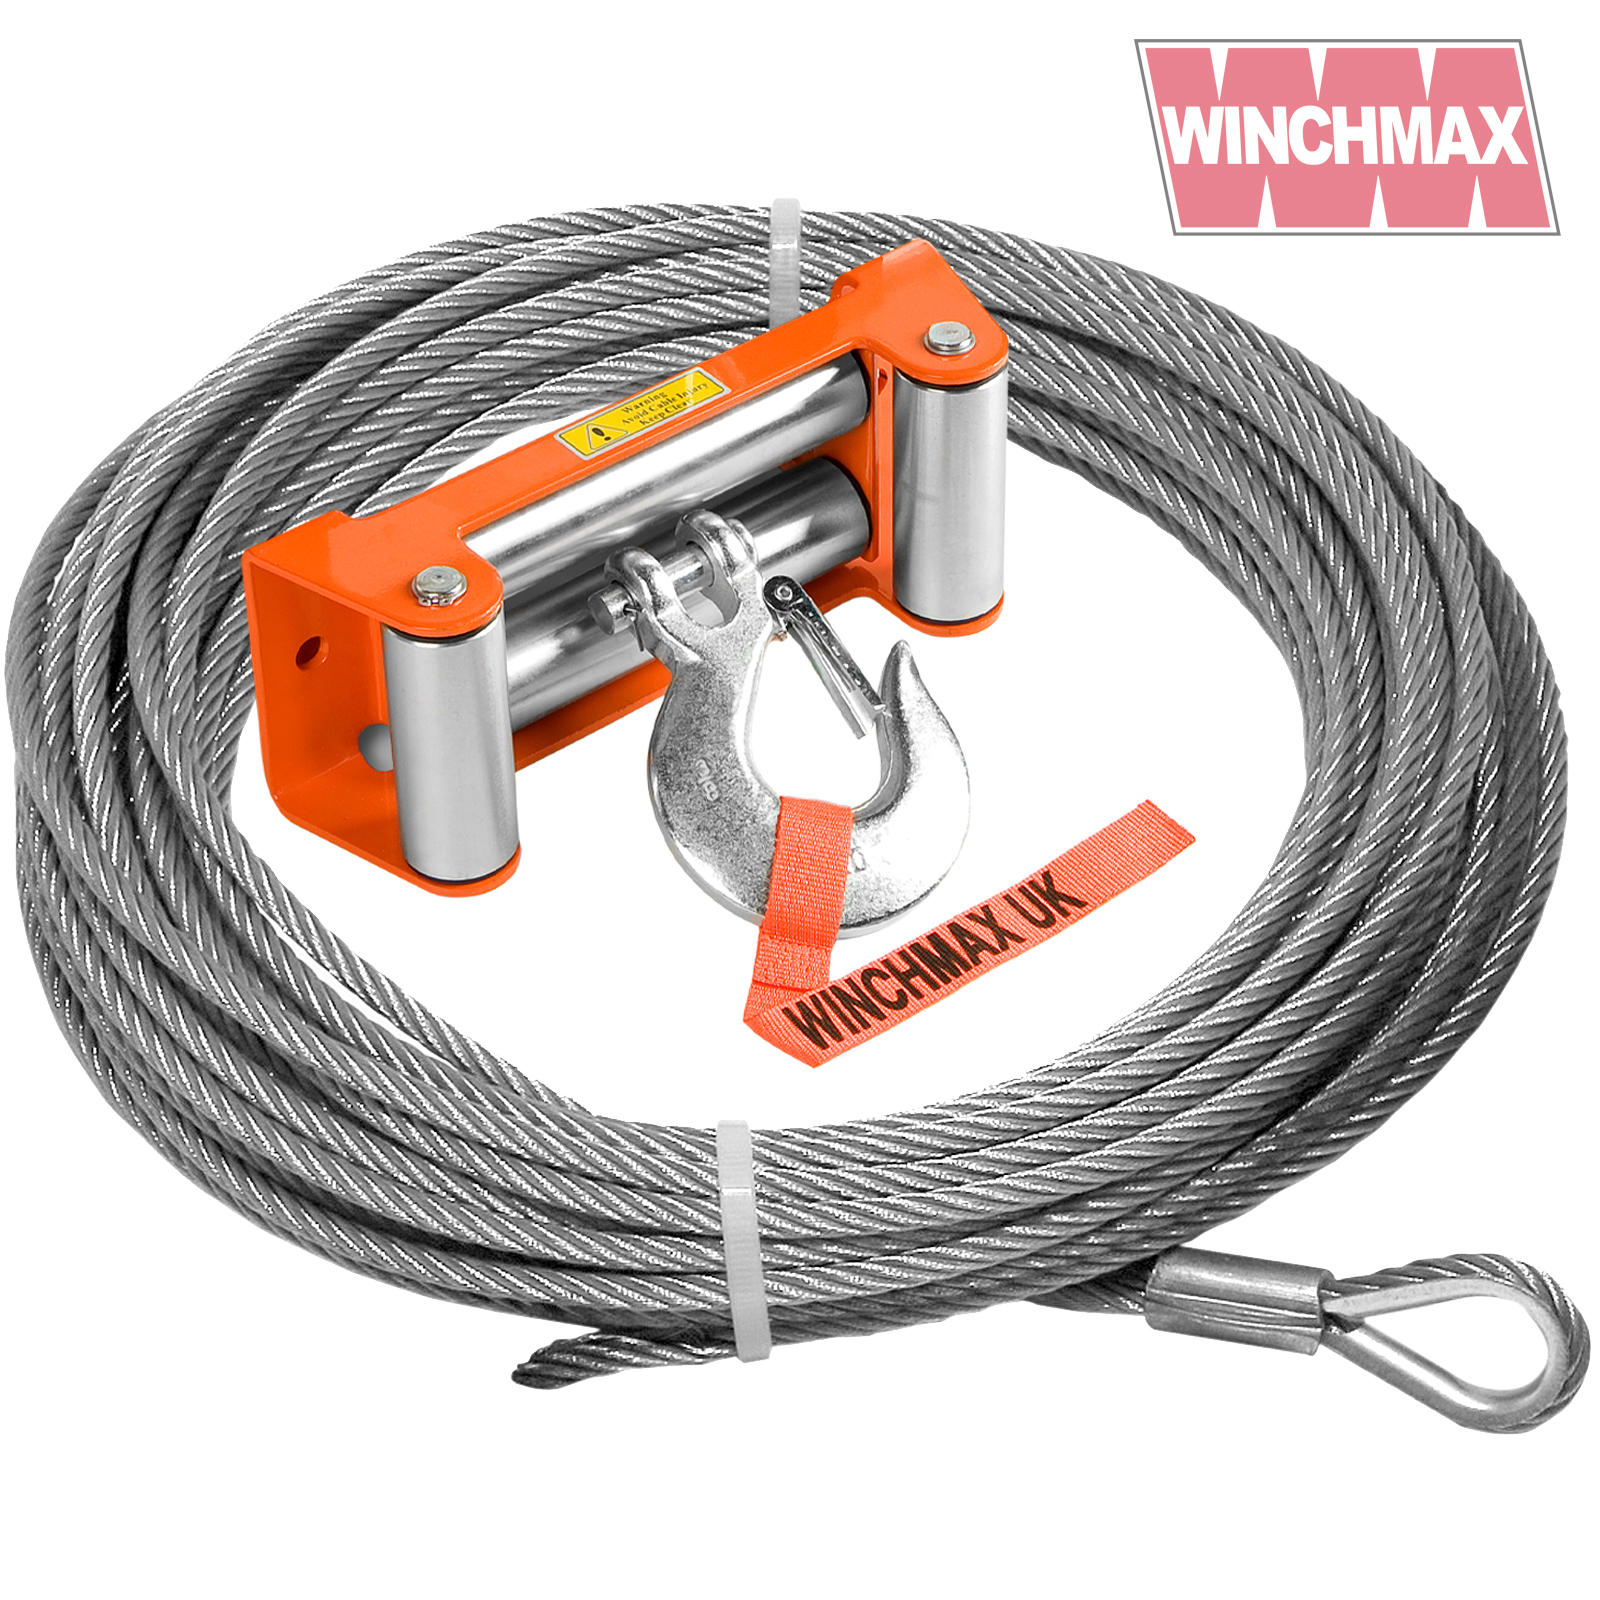 Steel Rope 26m X 9.5mm, Hole Fix. Roller Fairlead. 3/8 Inch Clevis Hook.  For winches up to 13,500lb. - Winchmax